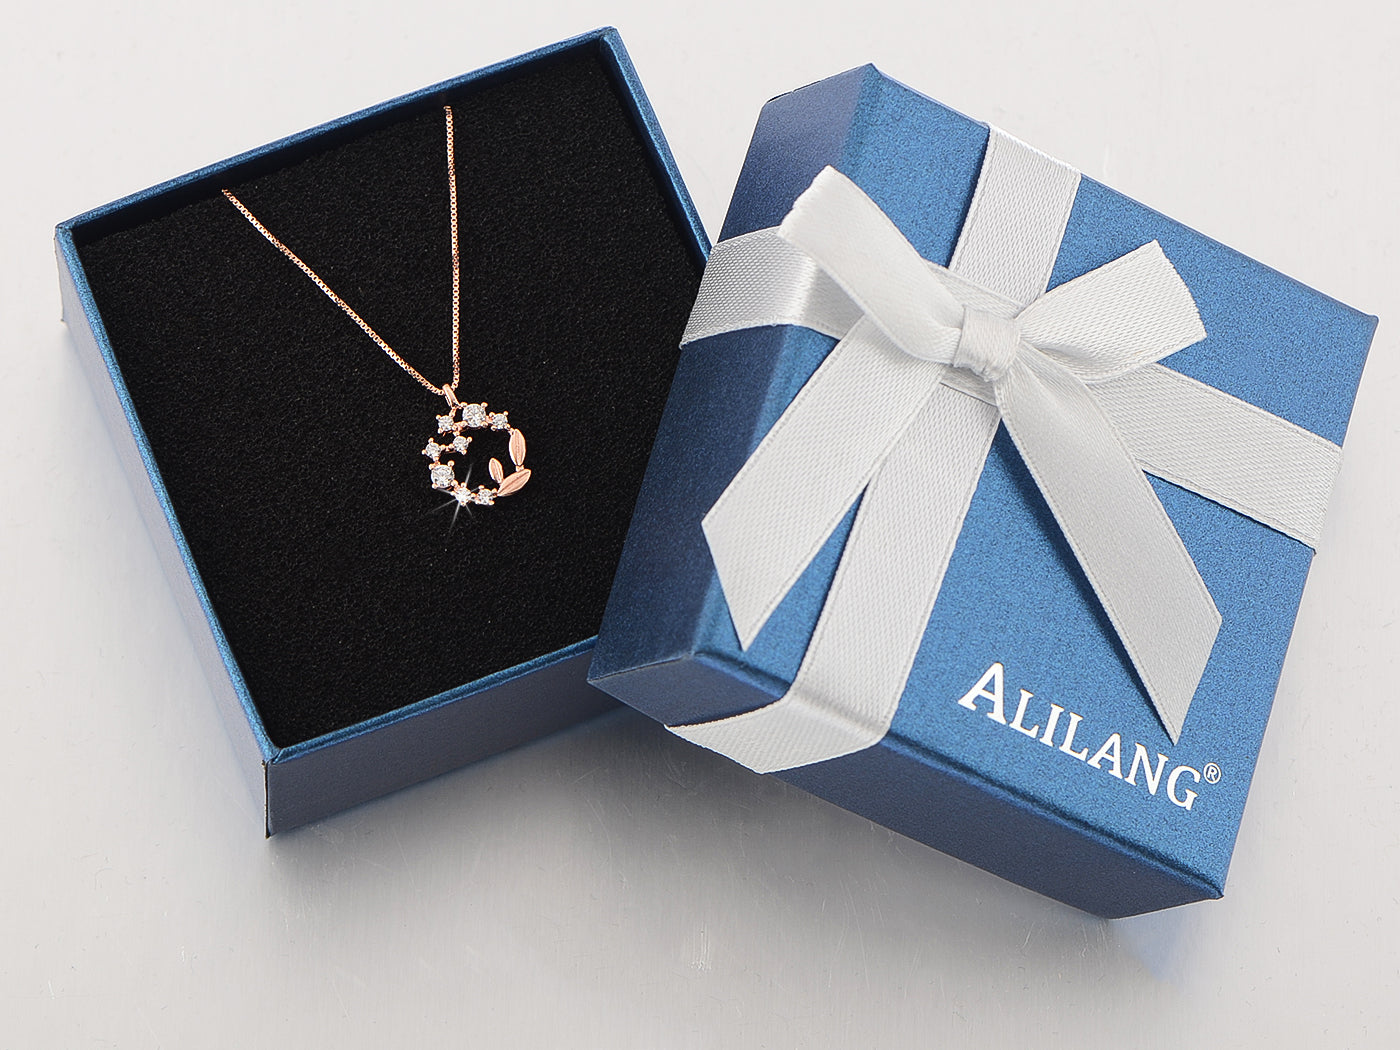 Alilang Wreath Pendant Necklace S925 Sterling Silver Necklace Glitzy Rhinestone Zircon Leaf Necklace Valentines Day Anniversary Jewelry Gift for Women Mother Wife